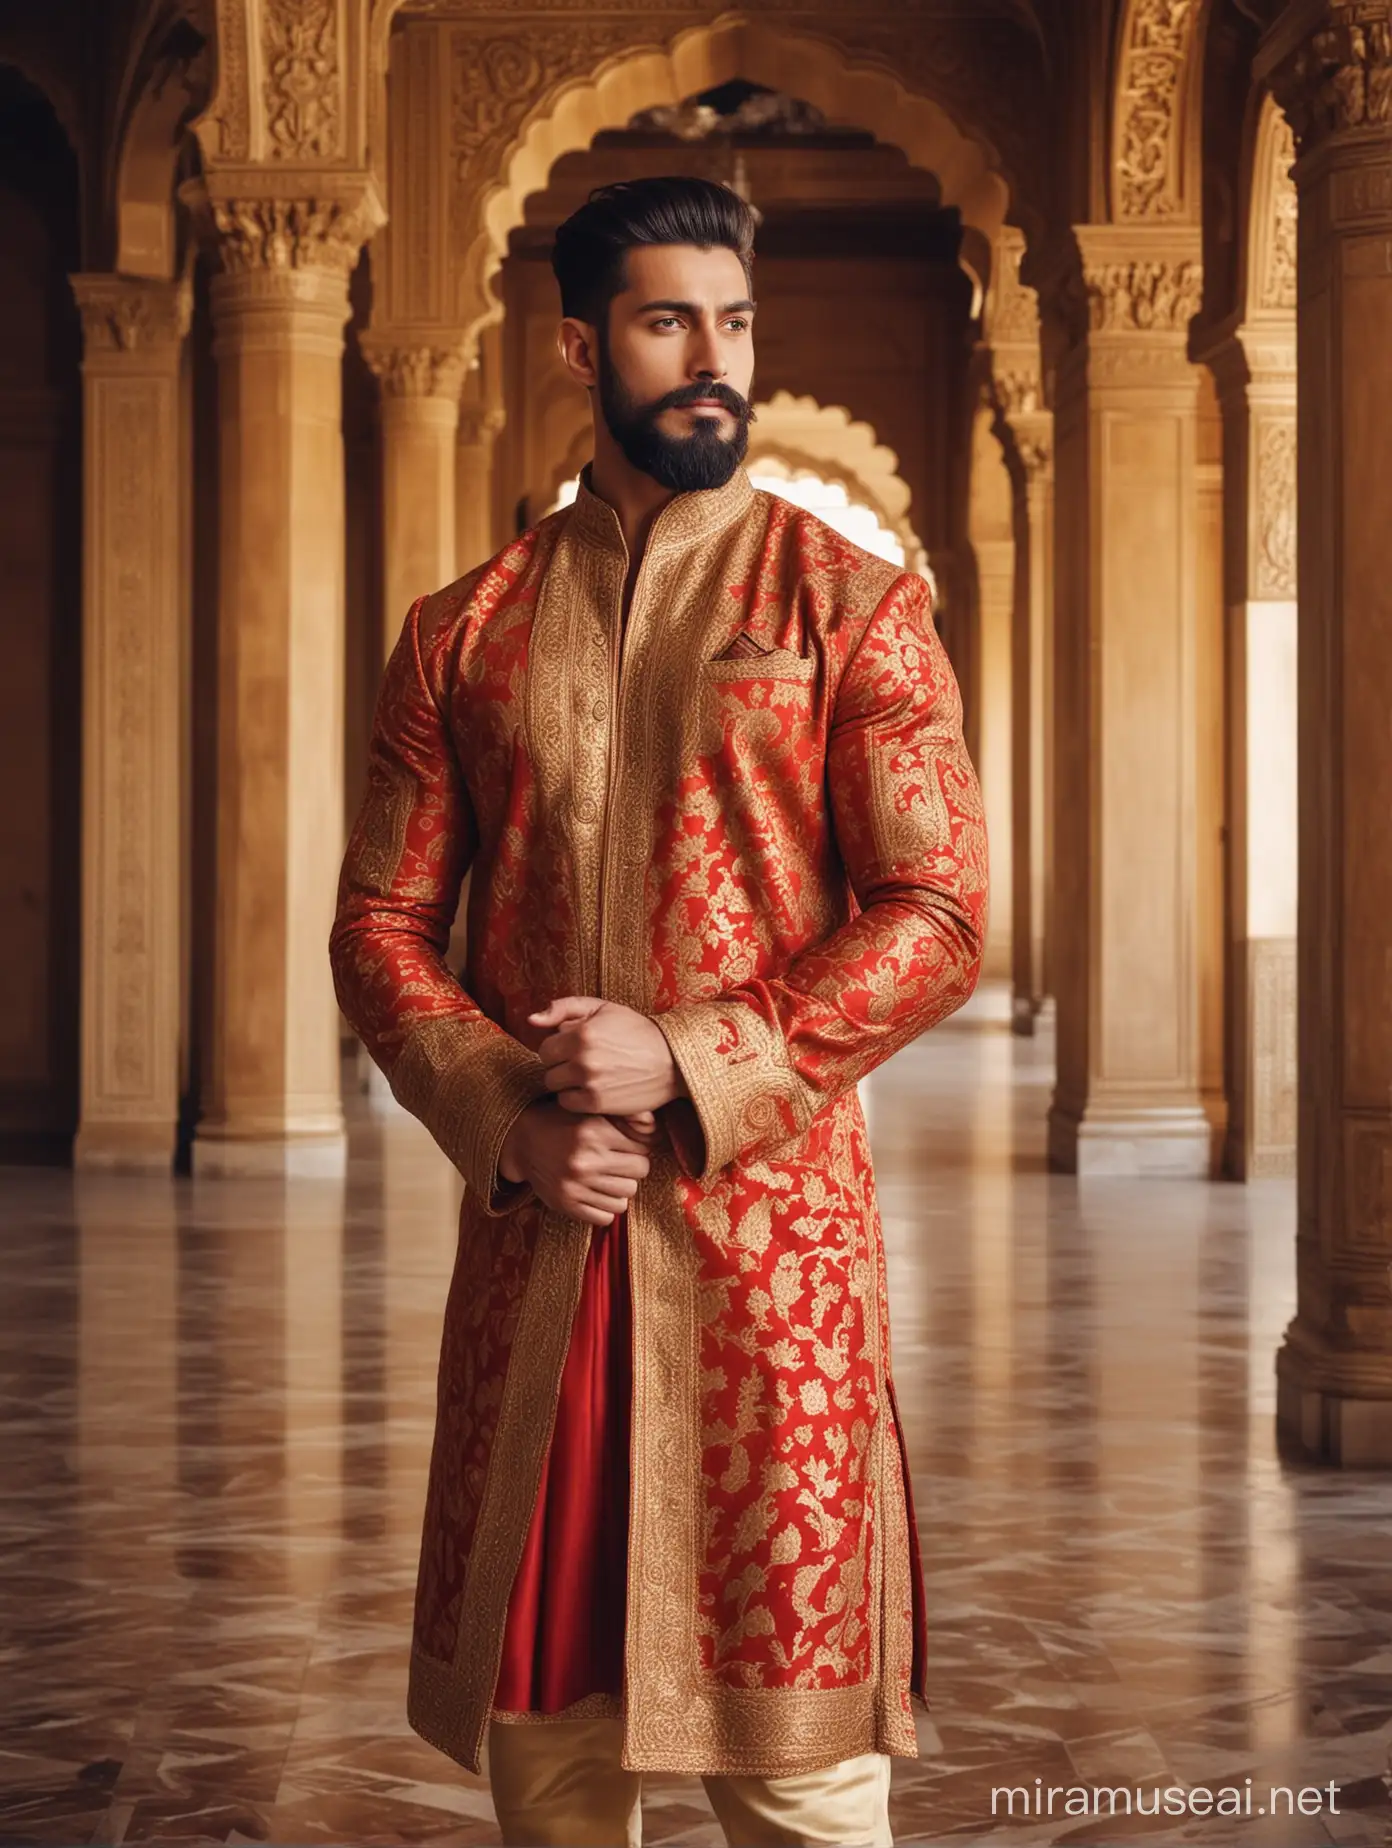 Tall and handsome muscular men with beautiful hairstyle and beard with big wide shoulder and chest in golden and red sherwani standing inside palace and showing his biceps 